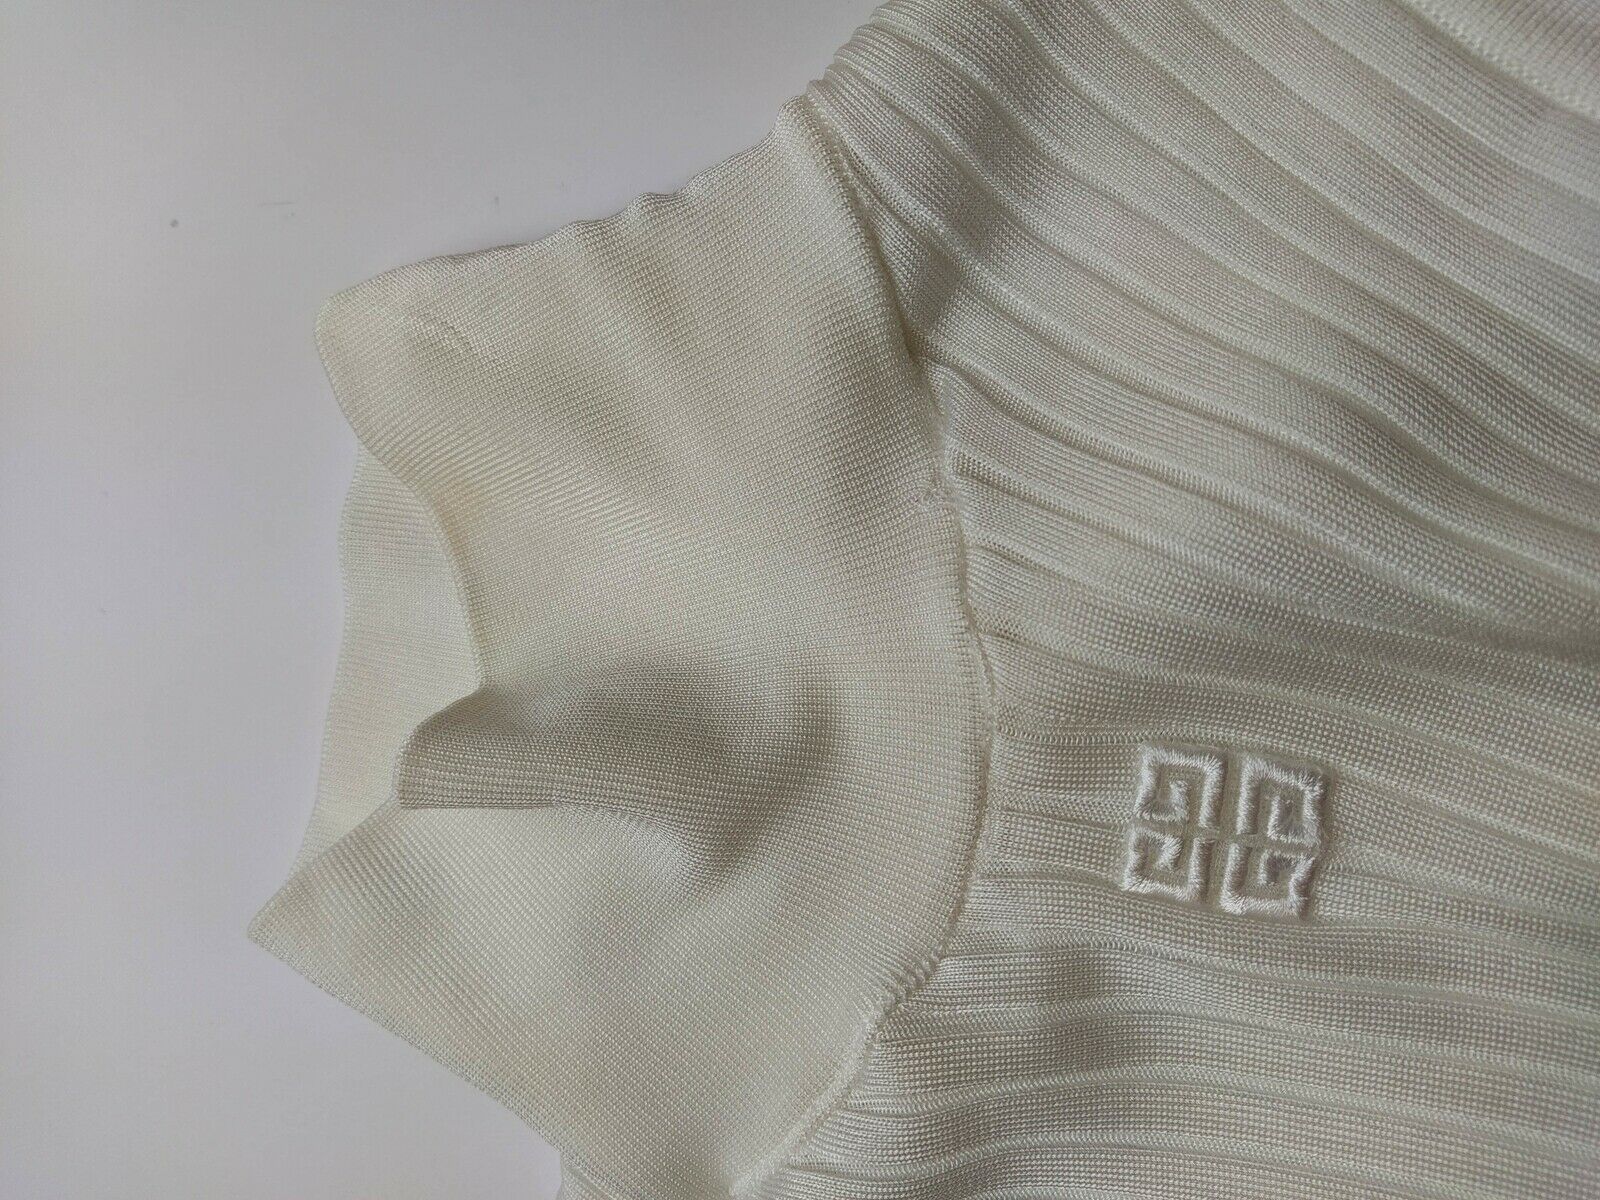 GIVENCHY Knitted Top Size S Made in Italy